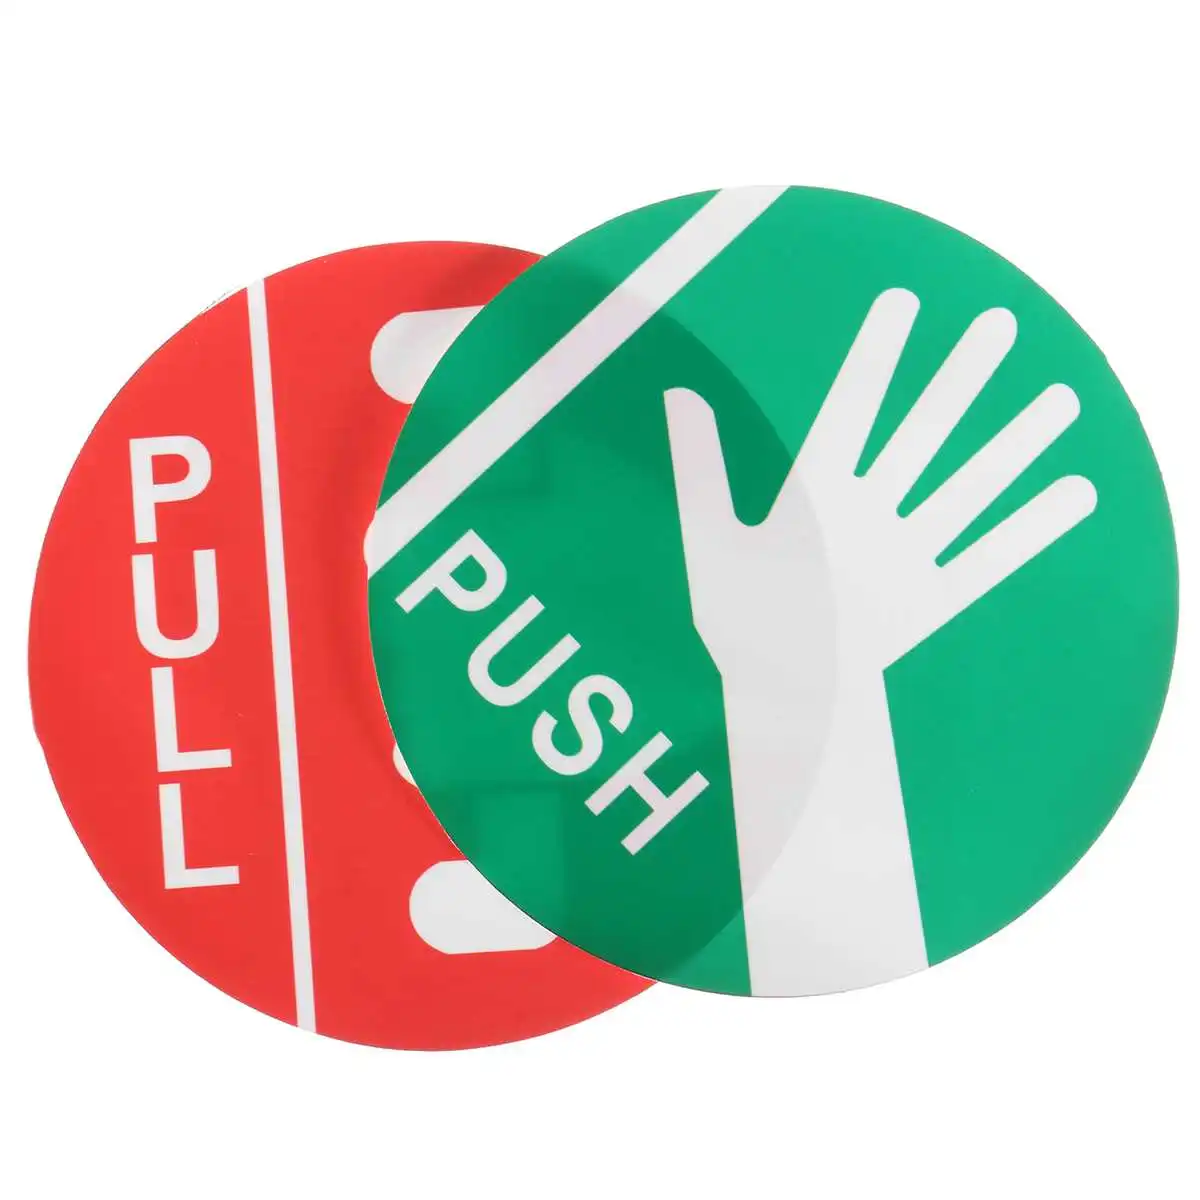 Push and Pull Door Window Stickers Vinyl Warning green and red self adhesive 